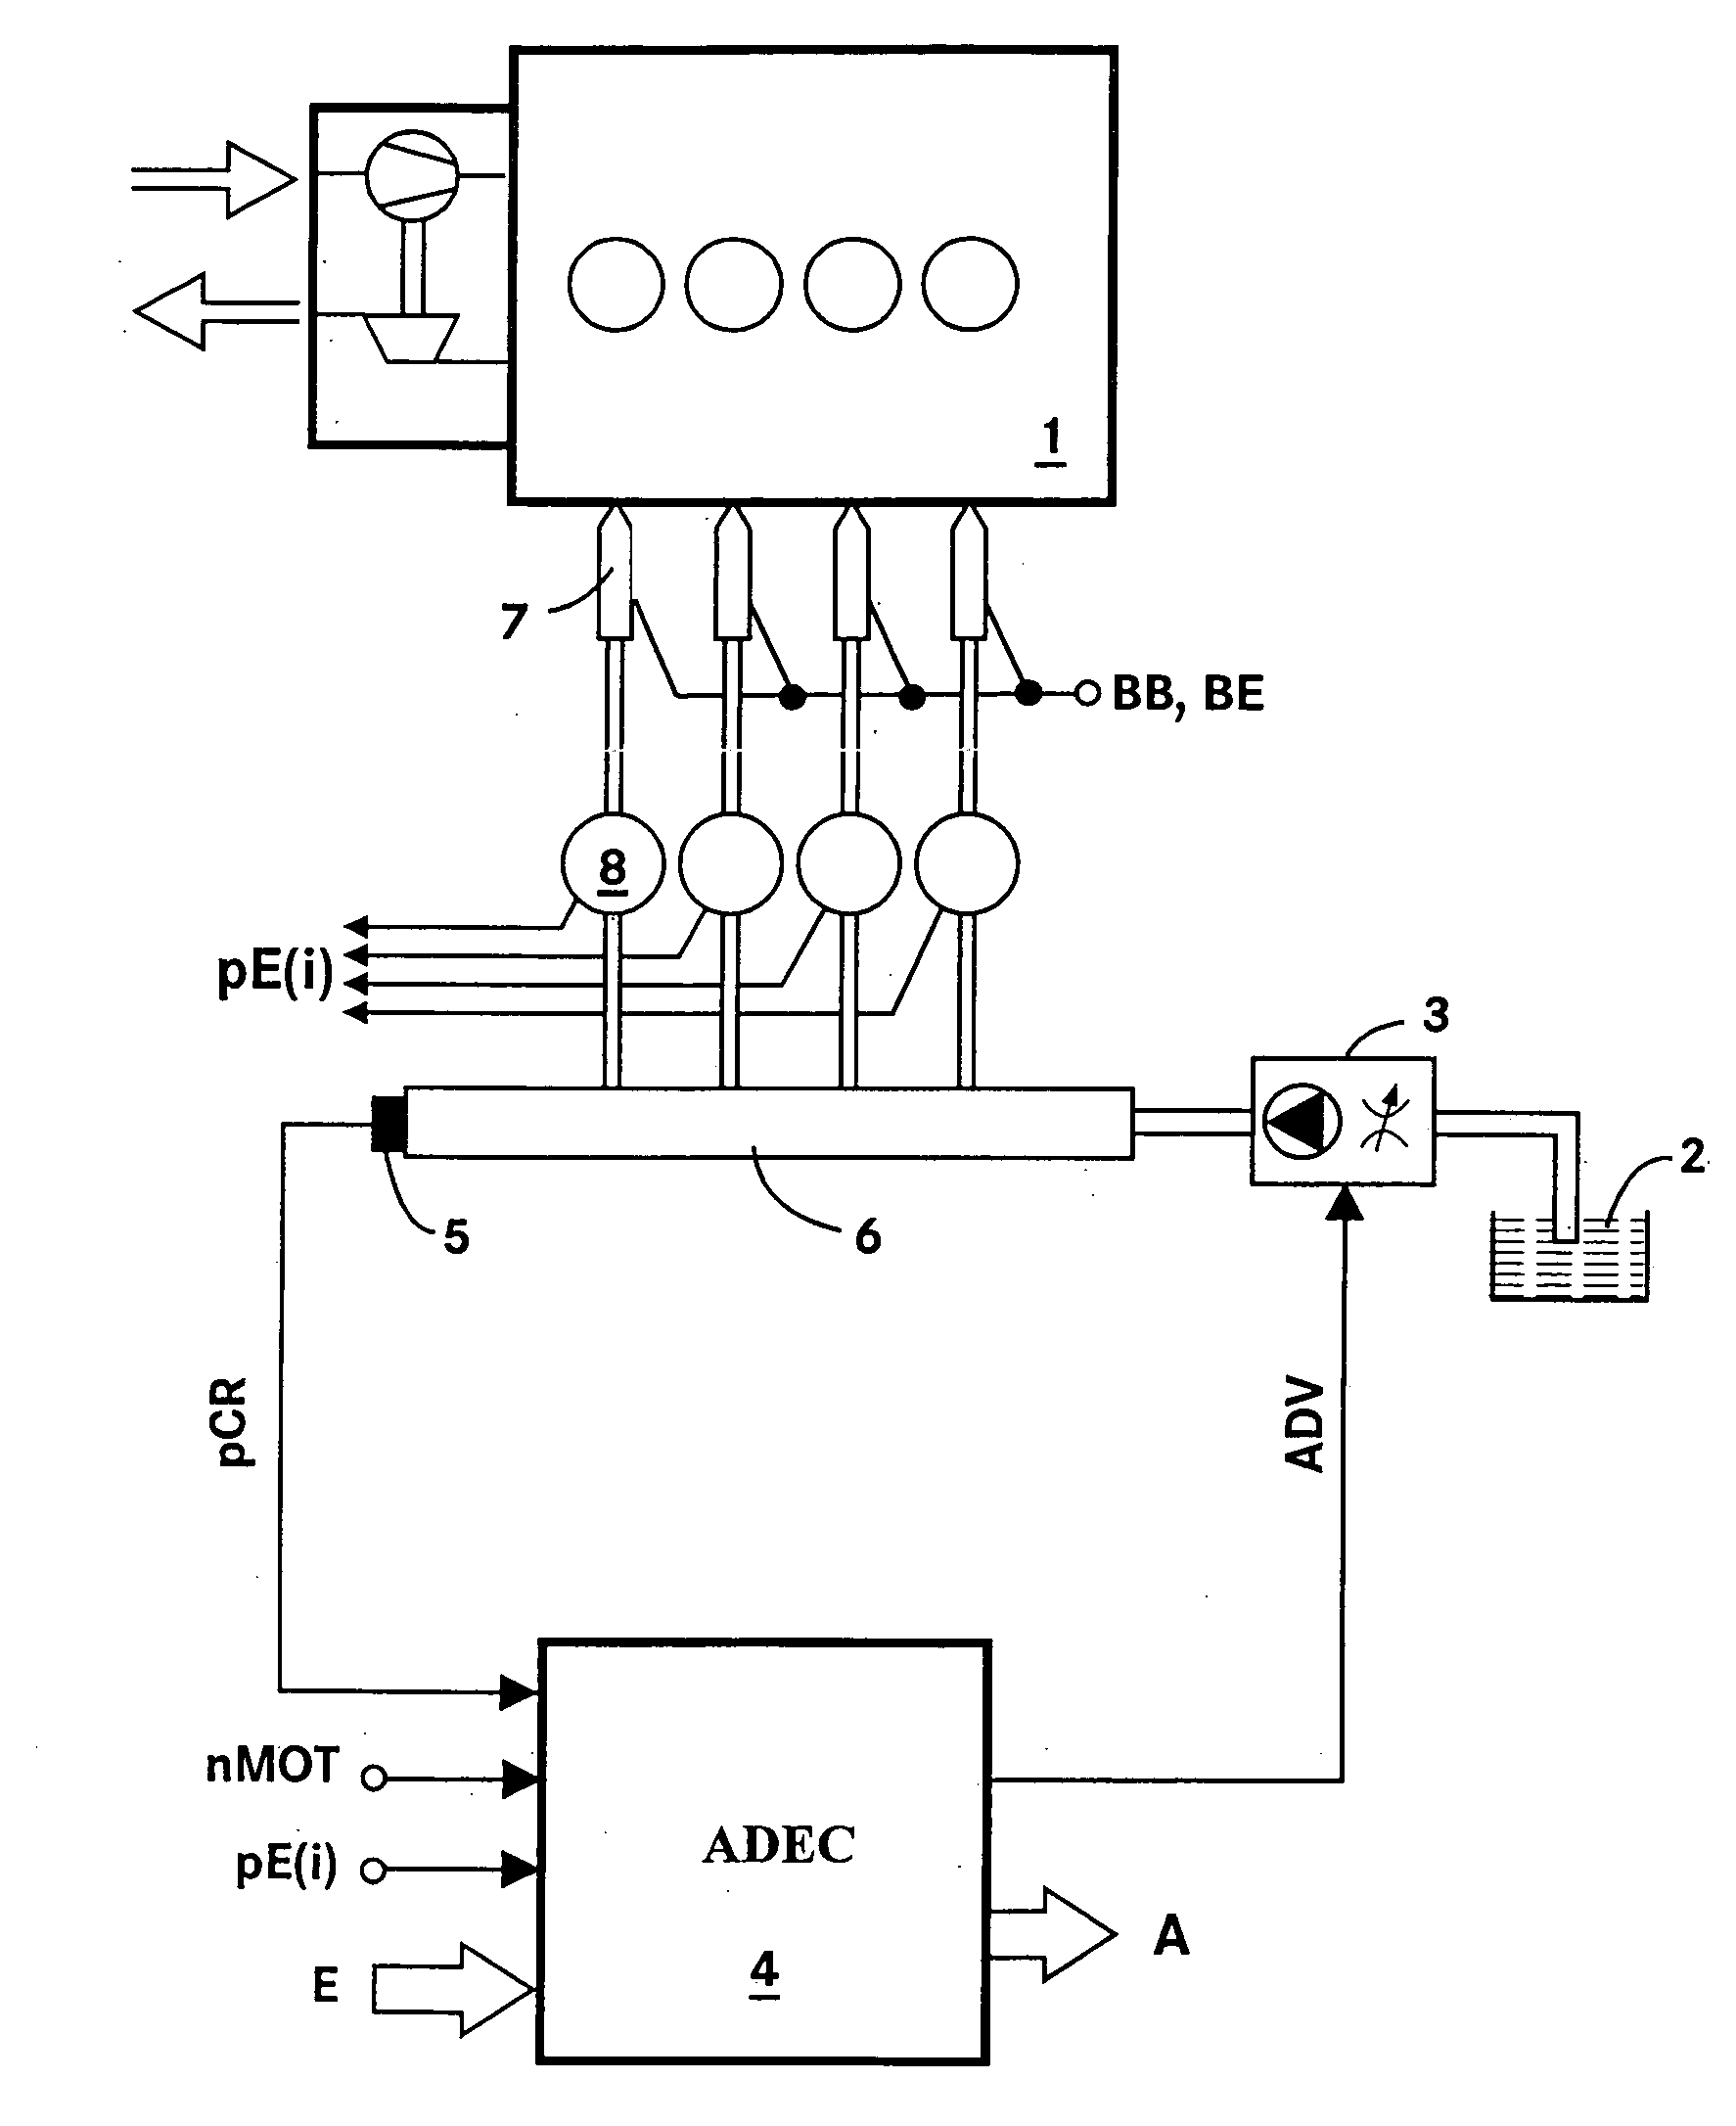 Method of controlling an internal combustion engine